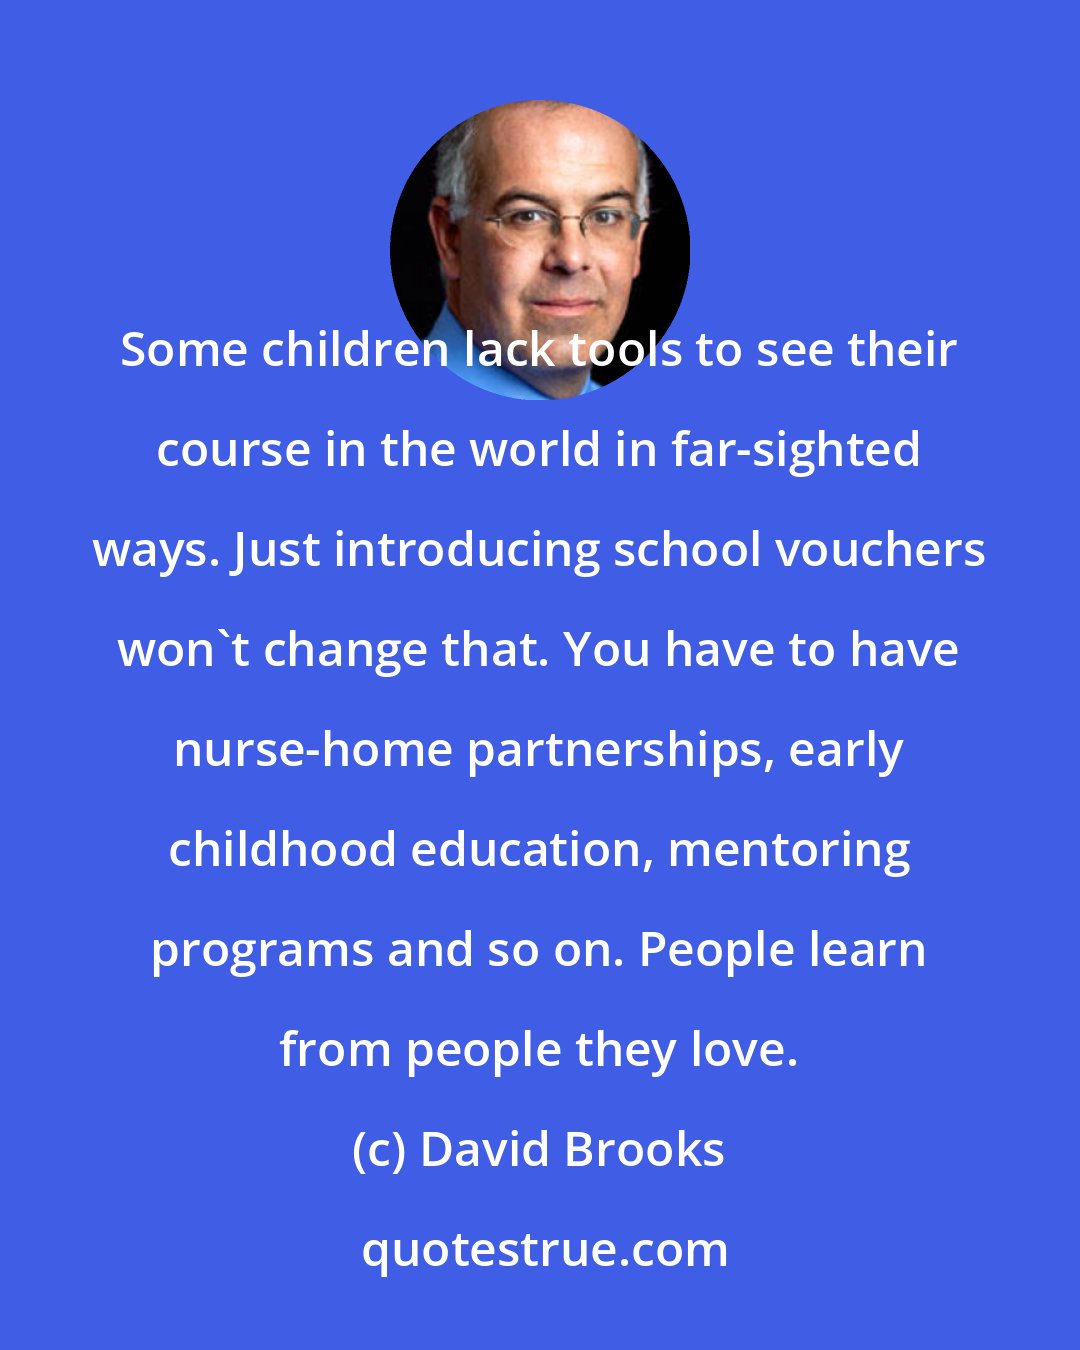 David Brooks: Some children lack tools to see their course in the world in far-sighted ways. Just introducing school vouchers won't change that. You have to have nurse-home partnerships, early childhood education, mentoring programs and so on. People learn from people they love.